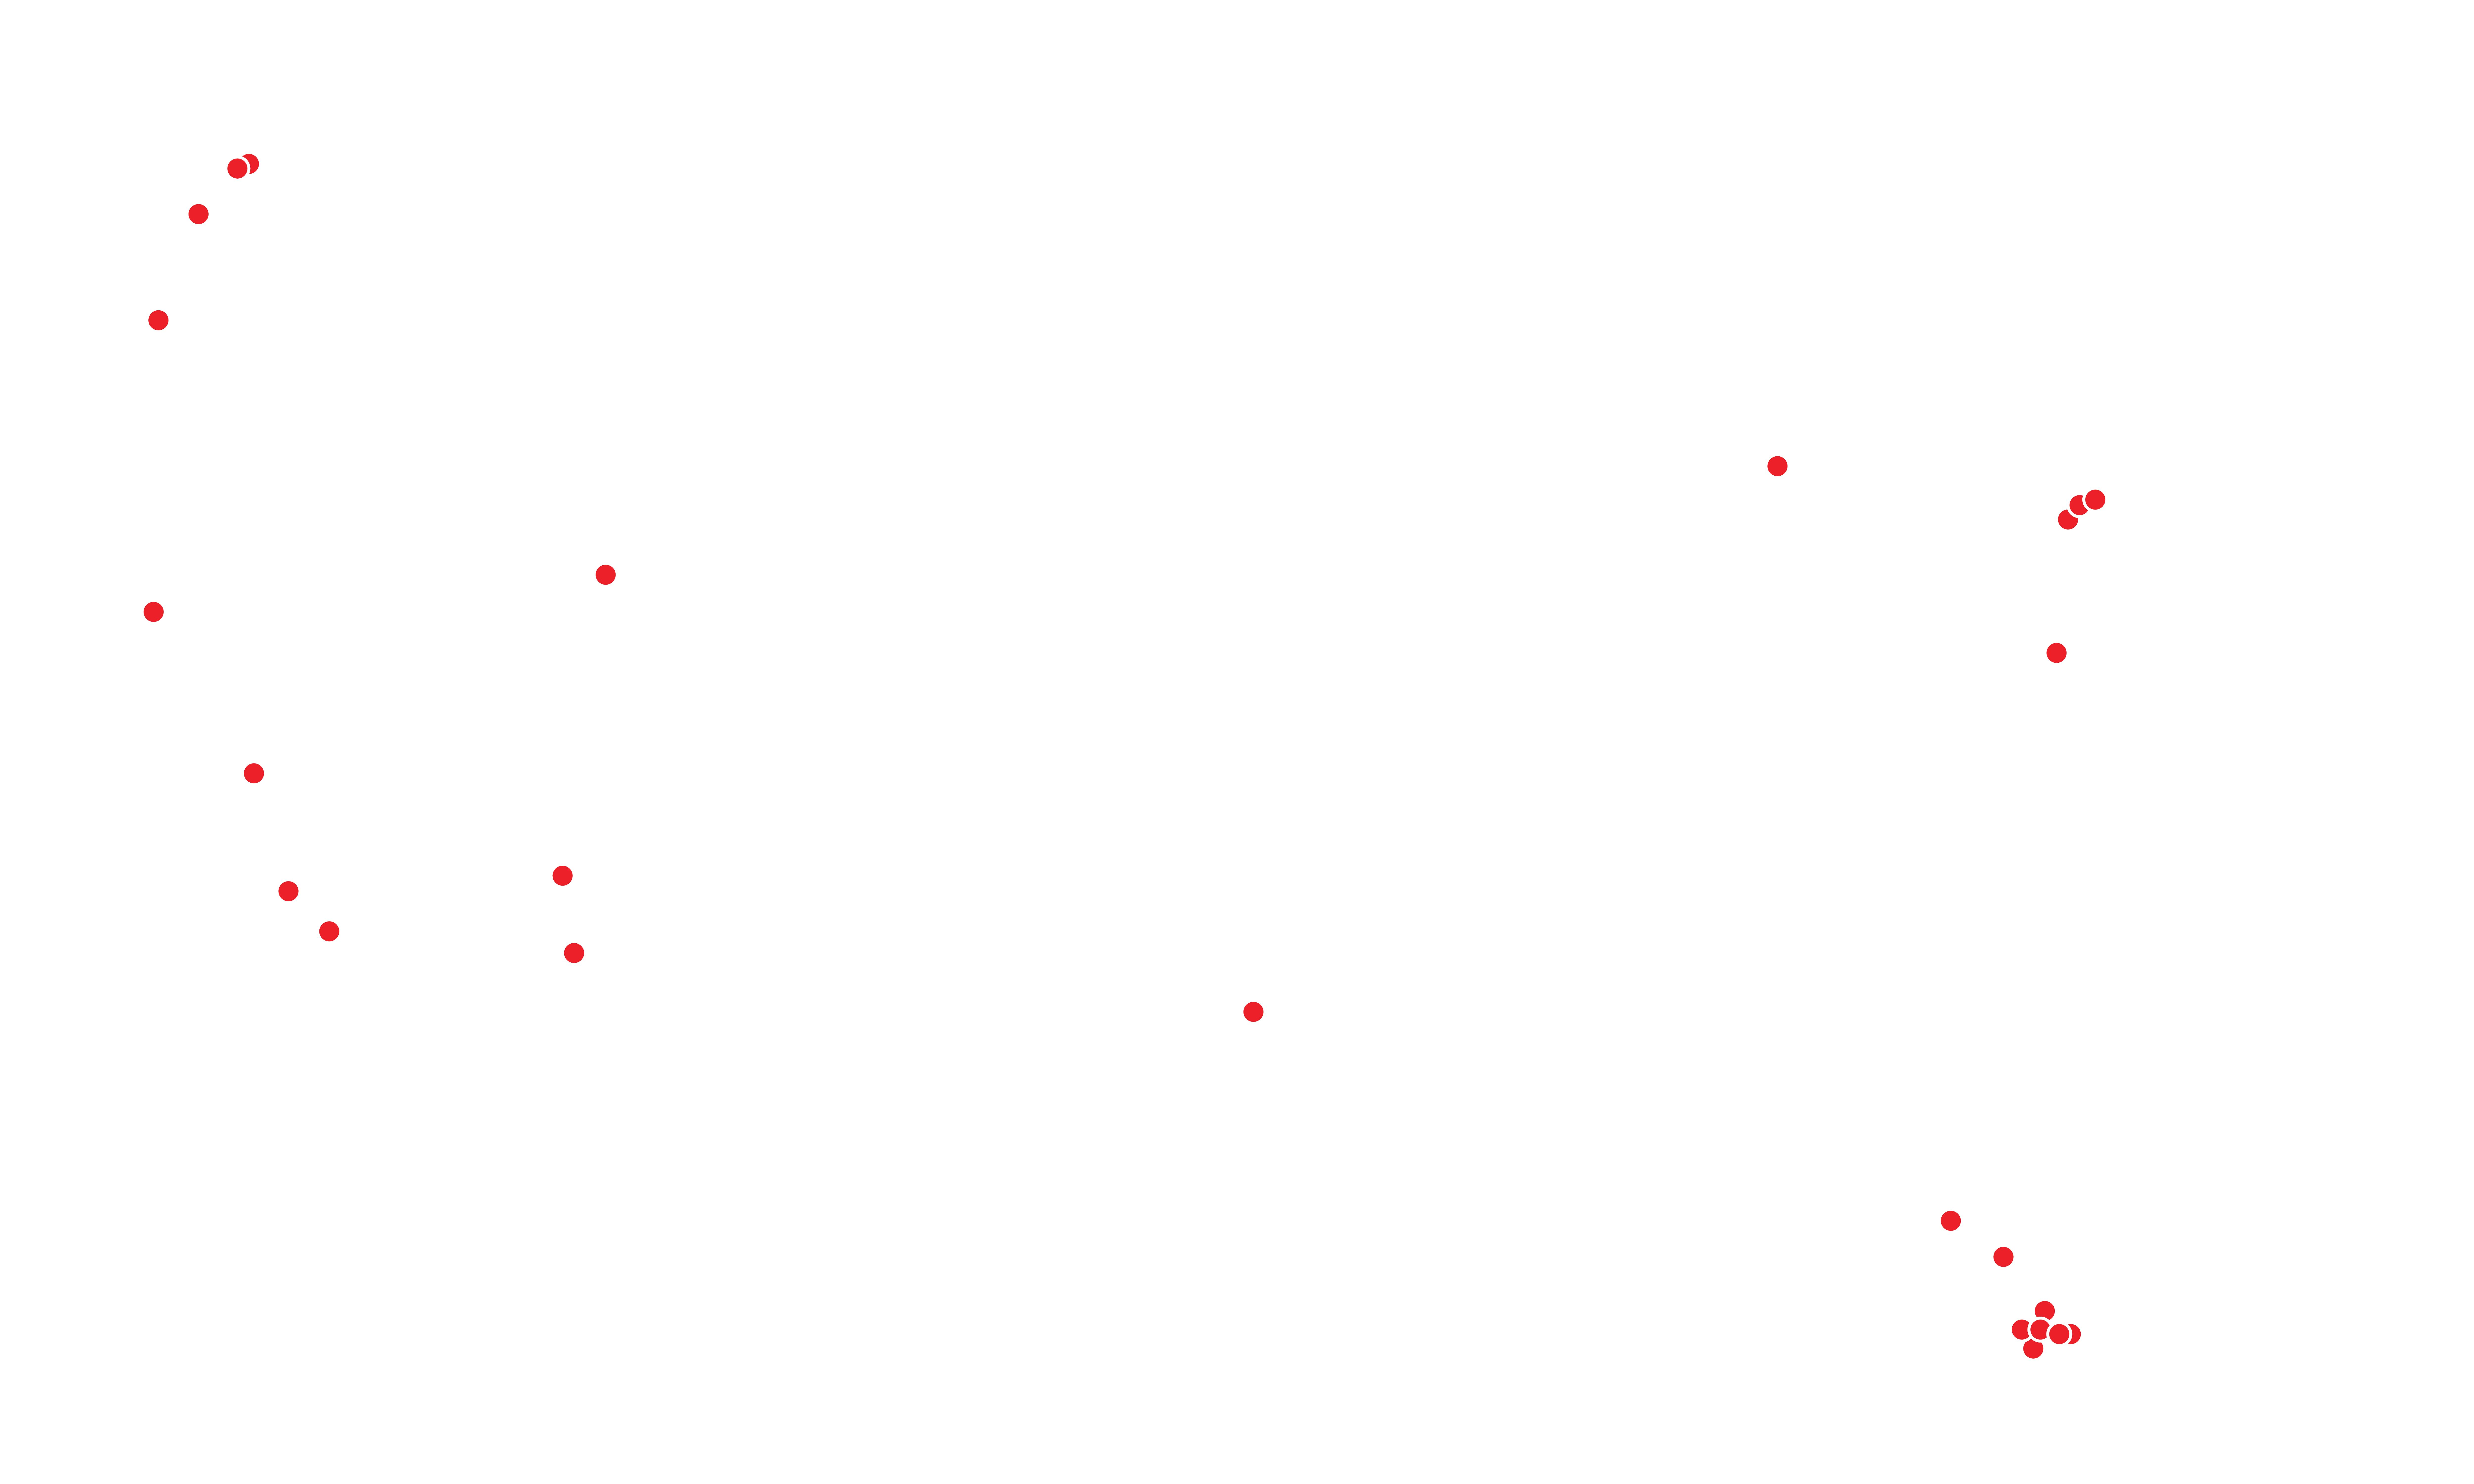 A map of the USA showing red dots in AZ, CA, FL, MI, TX, and VA where MITER Brands locations are built.